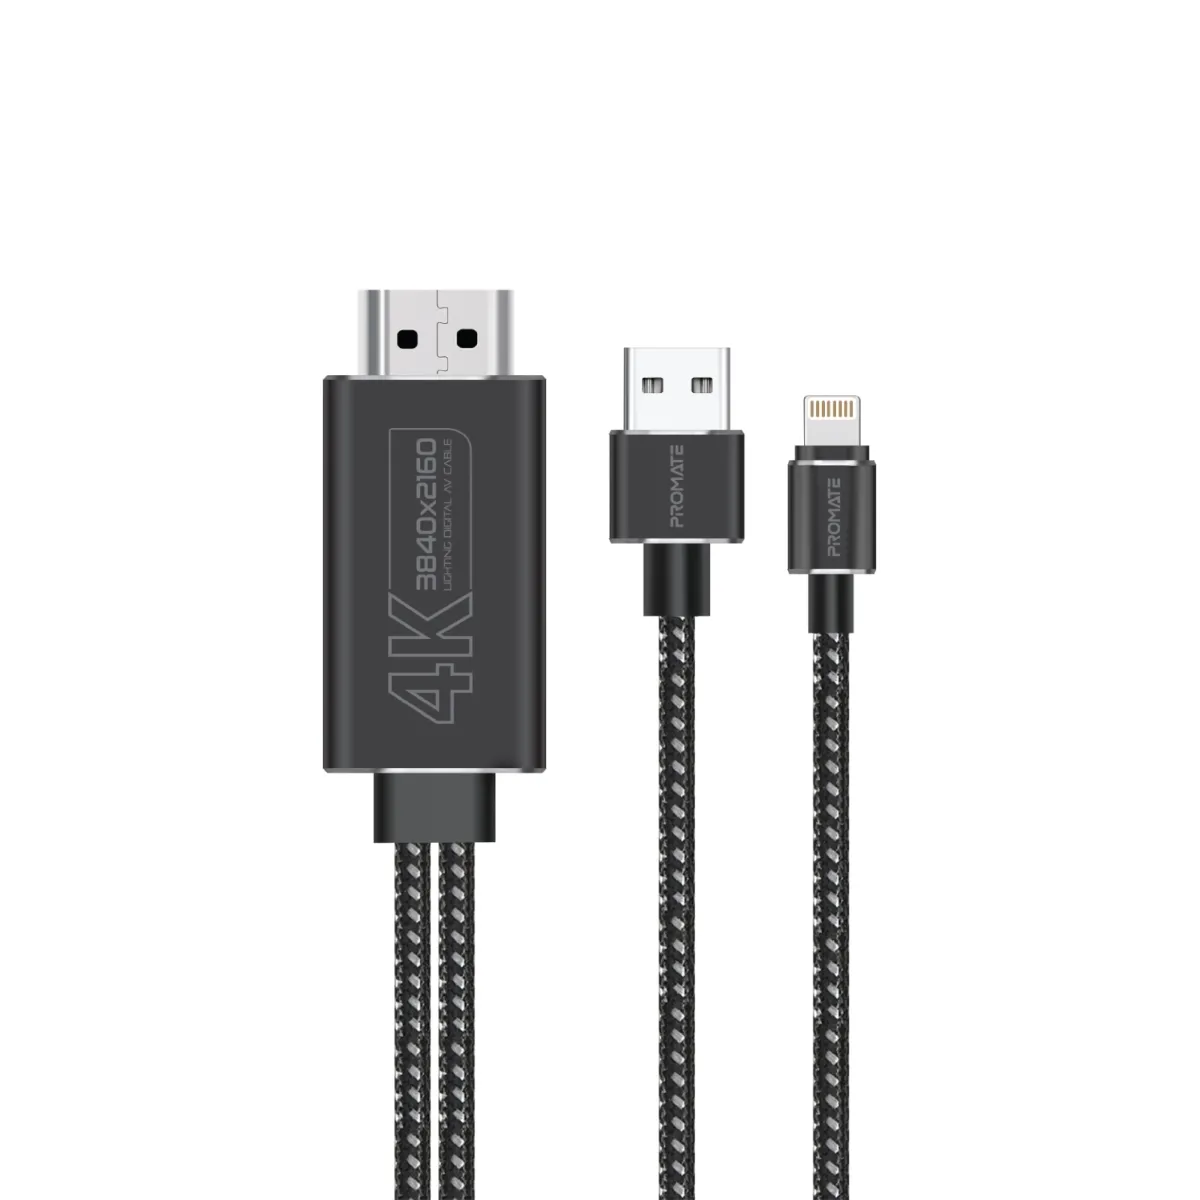 Promate 4K HDMI Cable, Ultra HD Durable Lightning Connector to HDMI Cable with USB Charging Bridge, 4K@30Hz, 1080p@60Hz Transmission and 1.8m Anti-Tangle Braided Cable for iPhones, iPads, Med